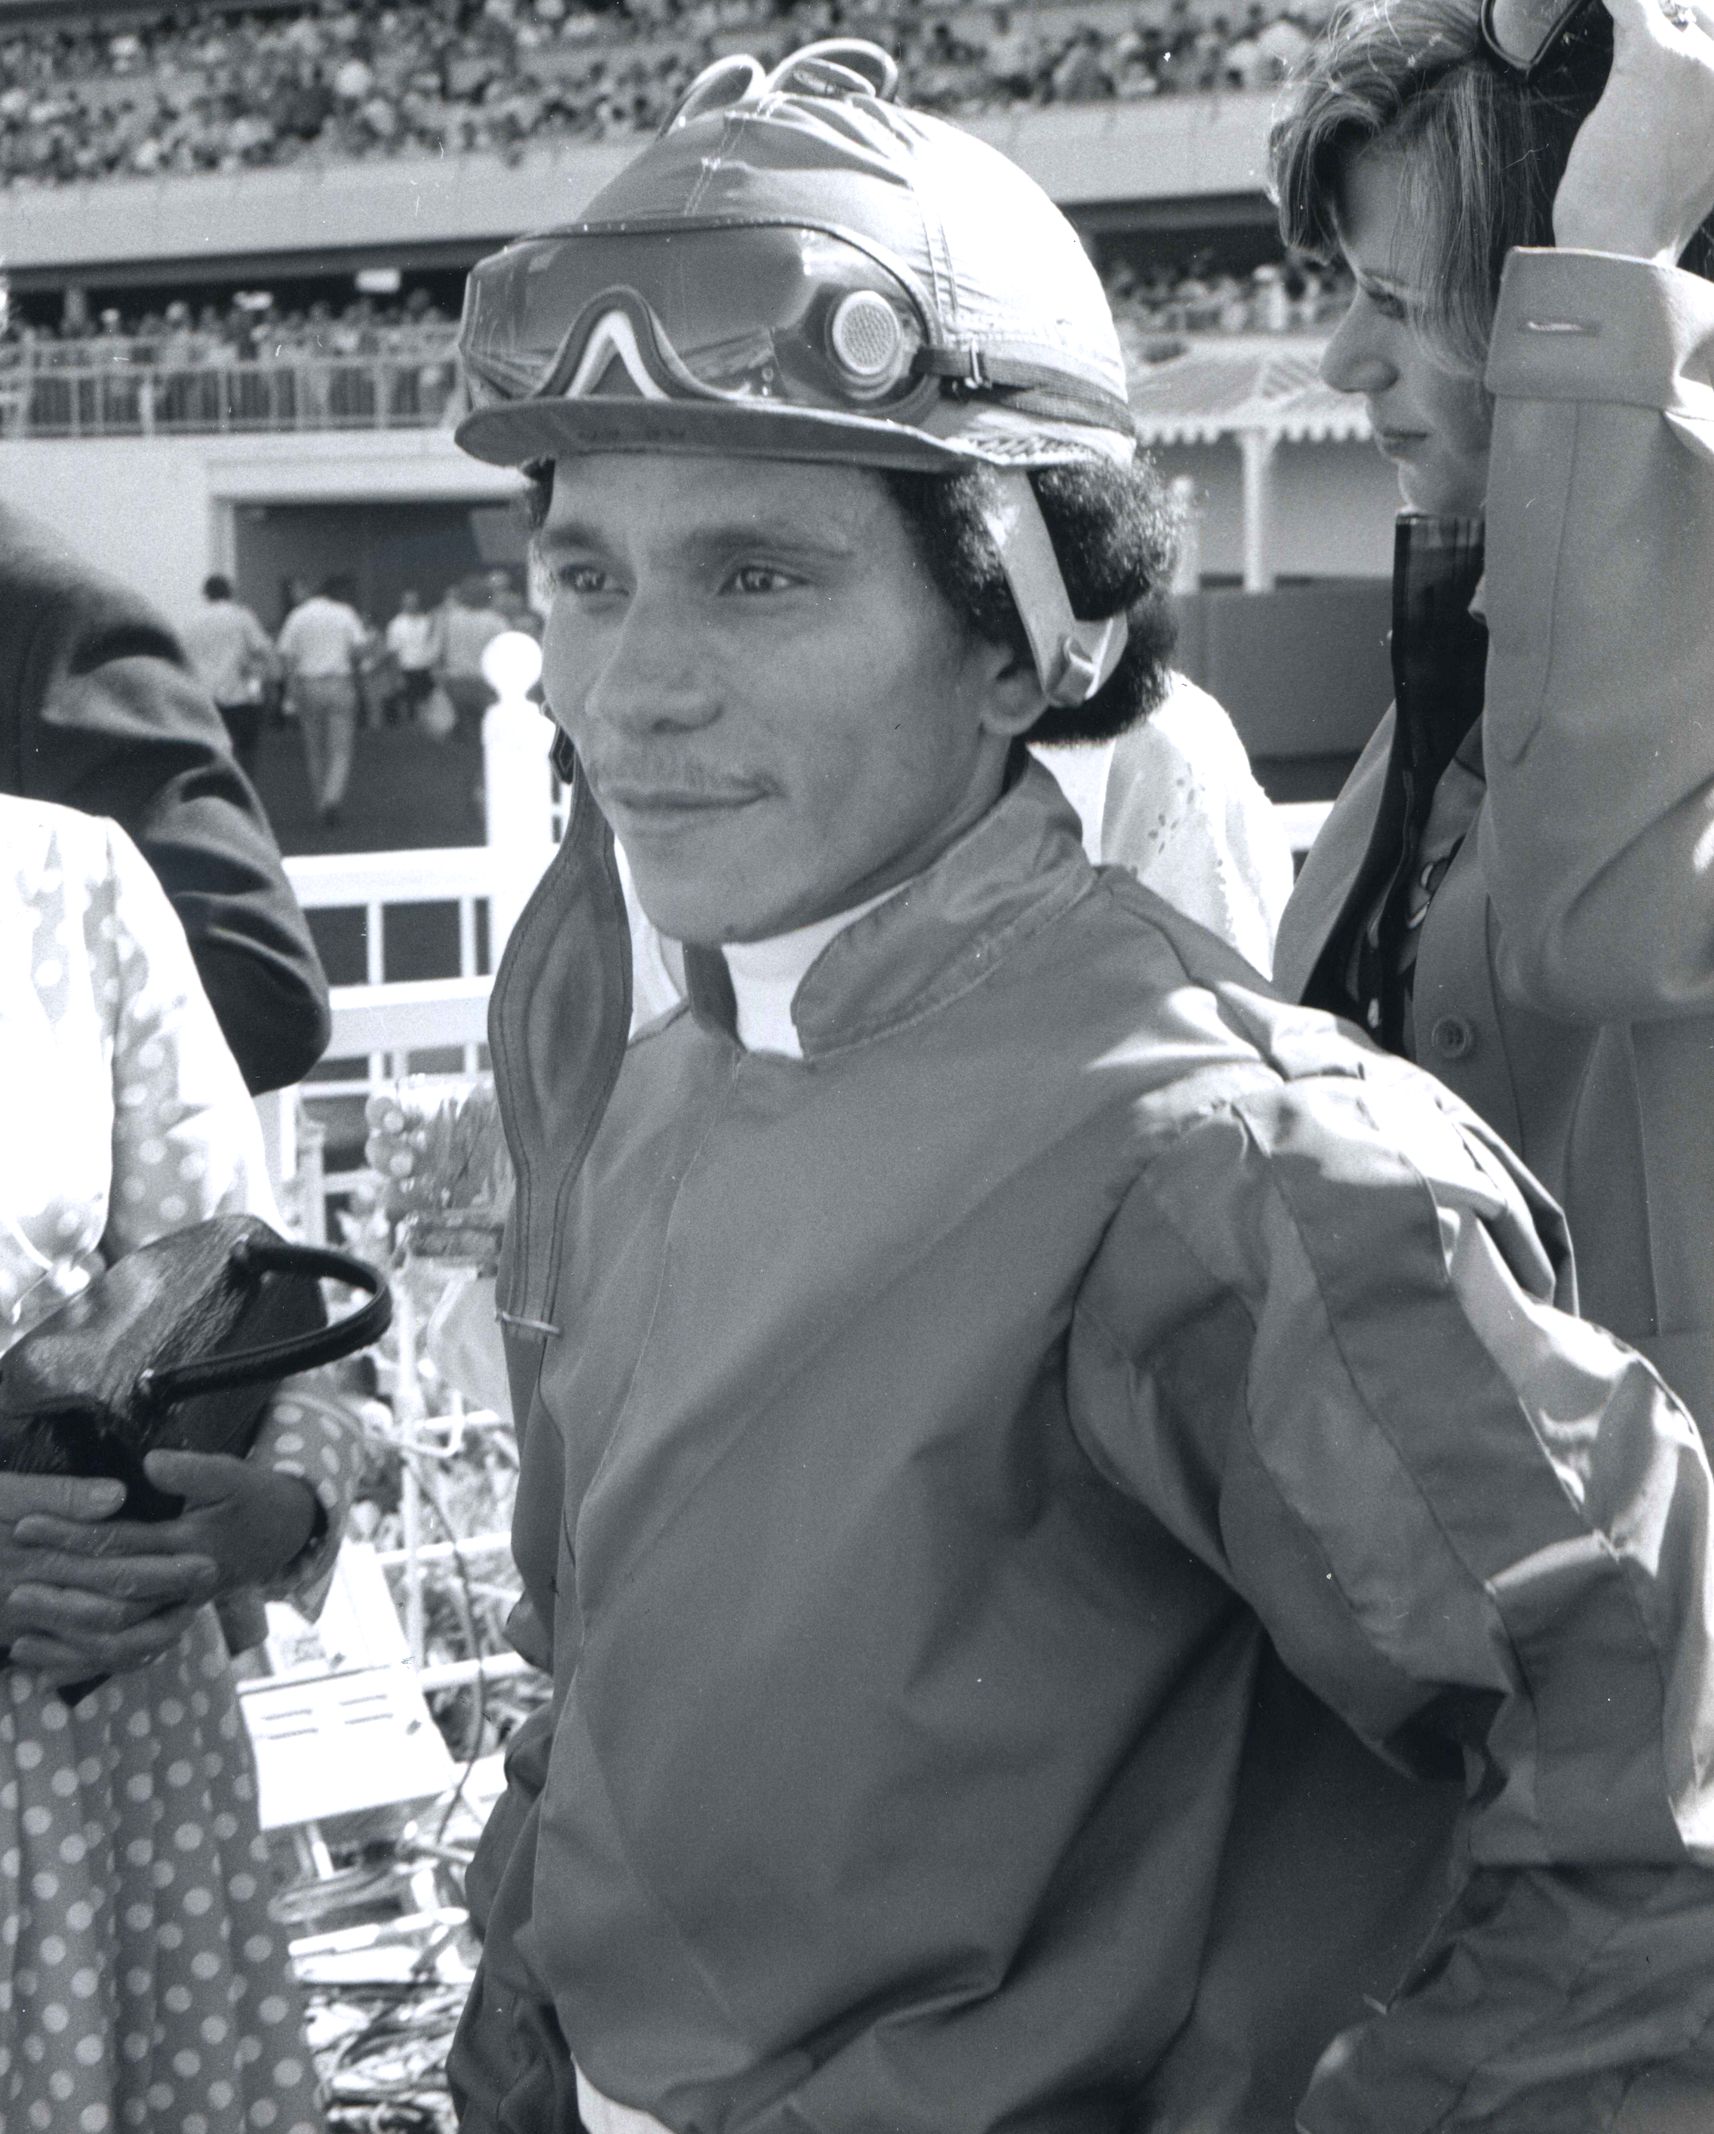 Jorge Velasquez after winning the $350,000 match race with Hall of Famer Chris Evert (against Miss Musket) at Hollywood Park on July 20, 1974 (Bill Mochon/Museum Collection)